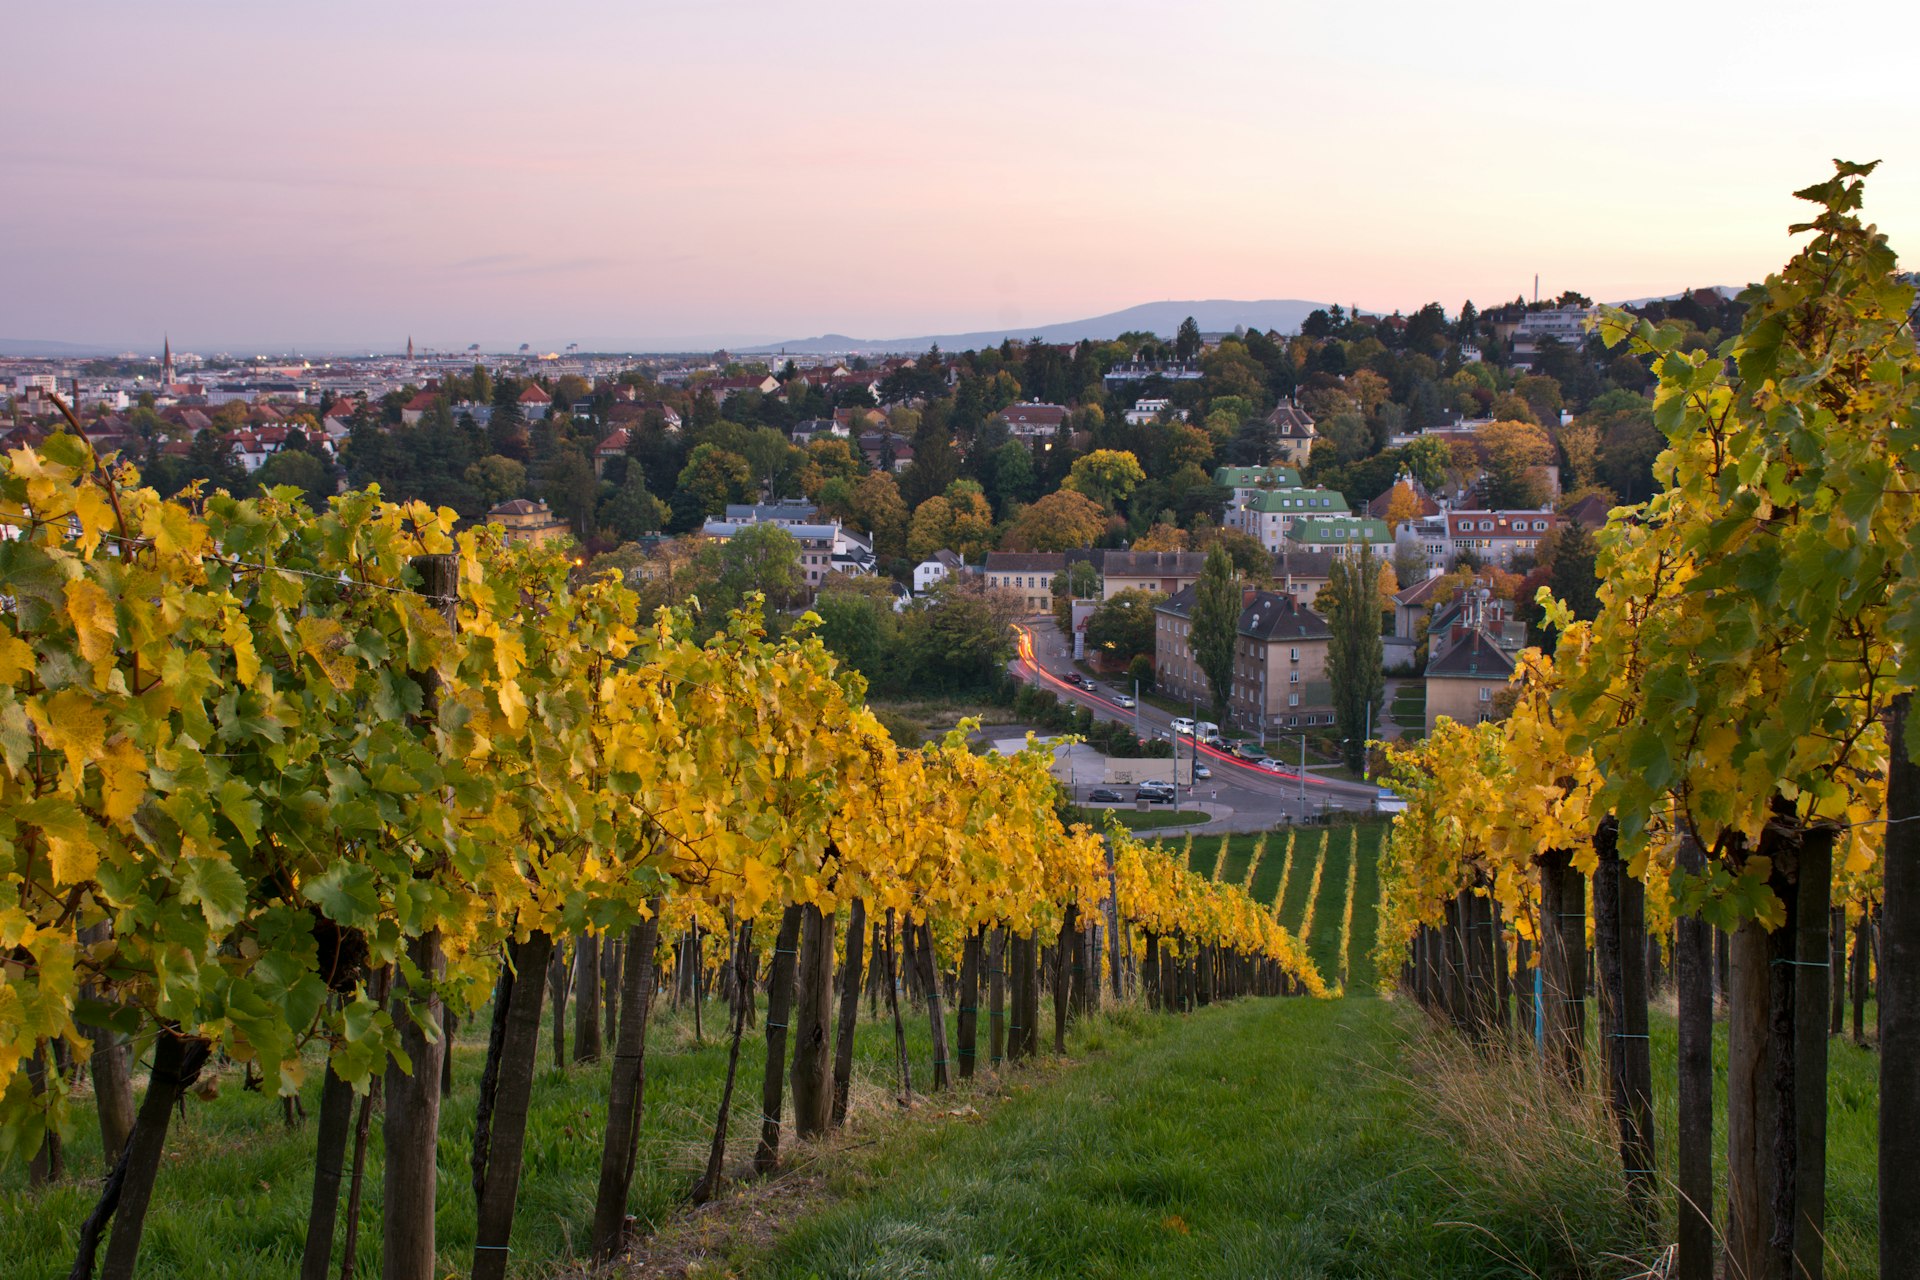 The Vienna suburbs at dusk as seen by from a vineyard in the Wienerwald